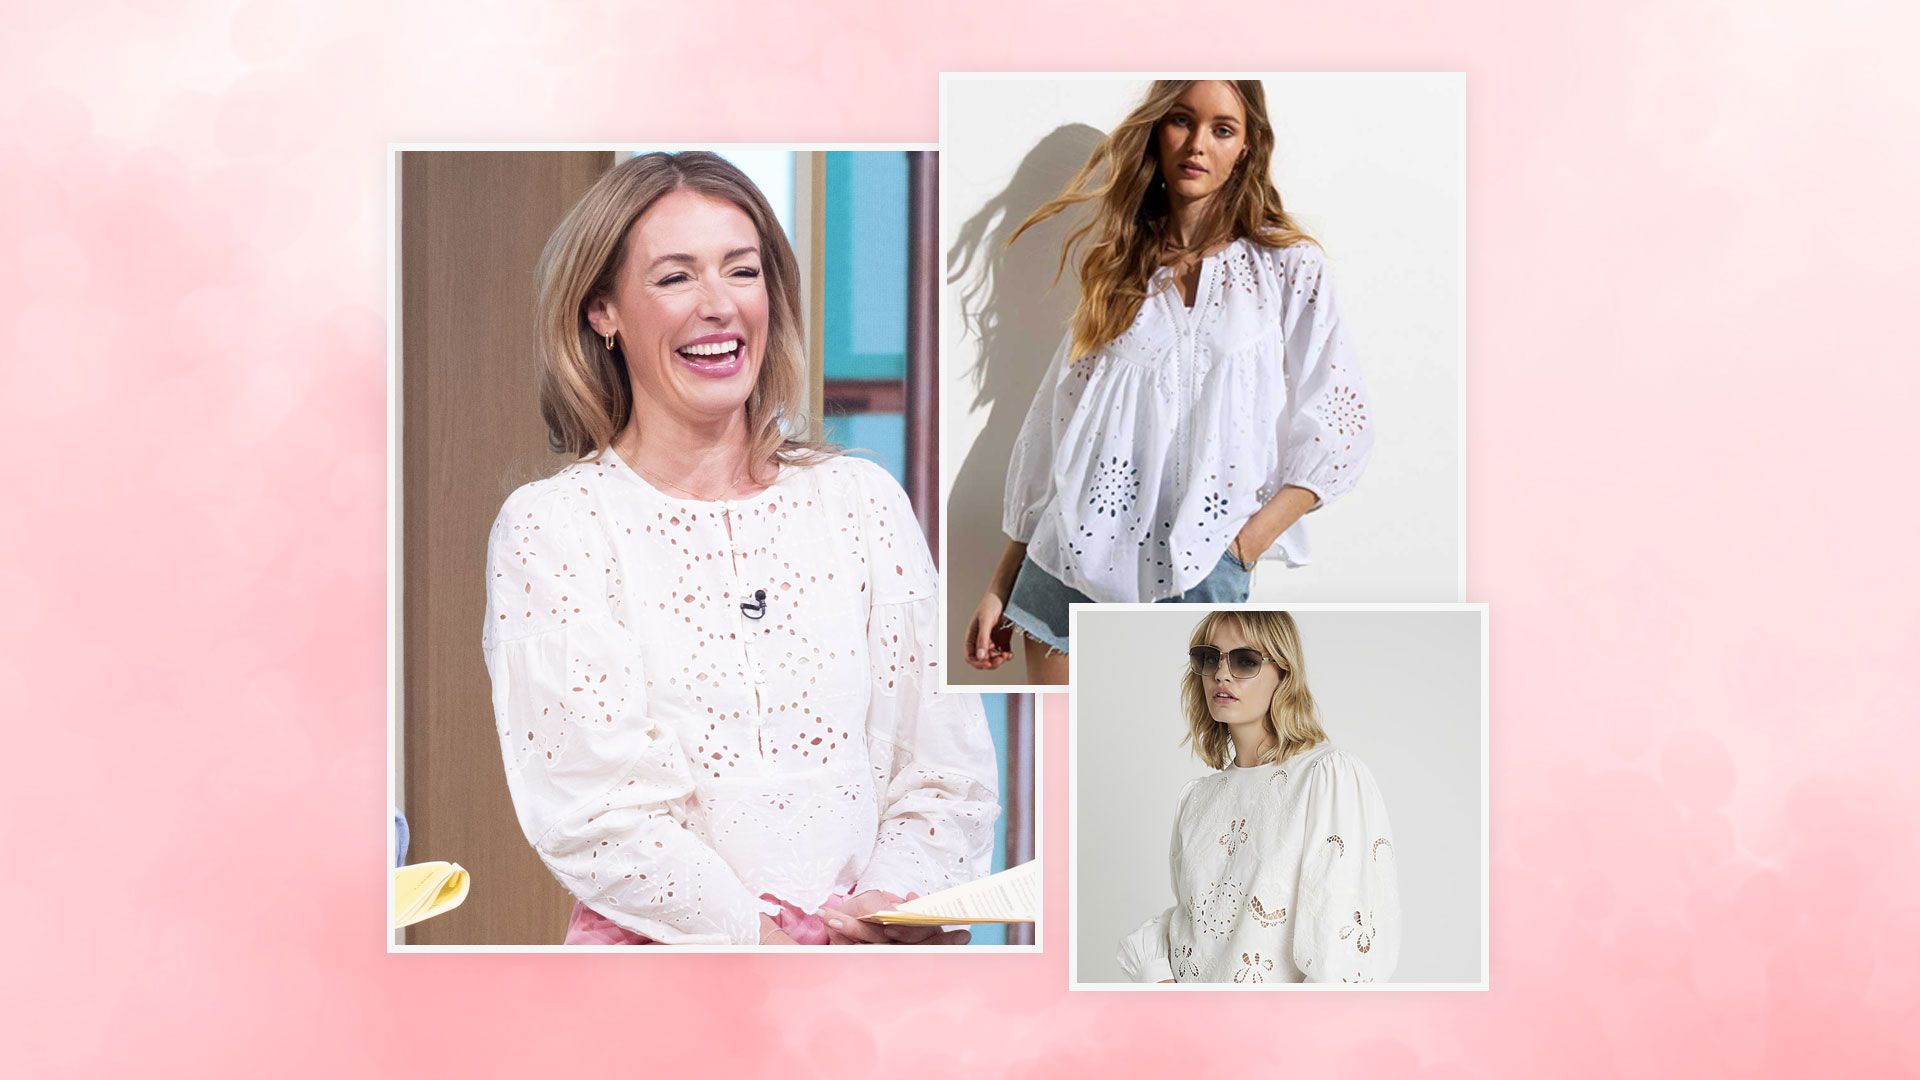 cat Deeley white broderie anglaise with high street lookalikes from New Look and River Island